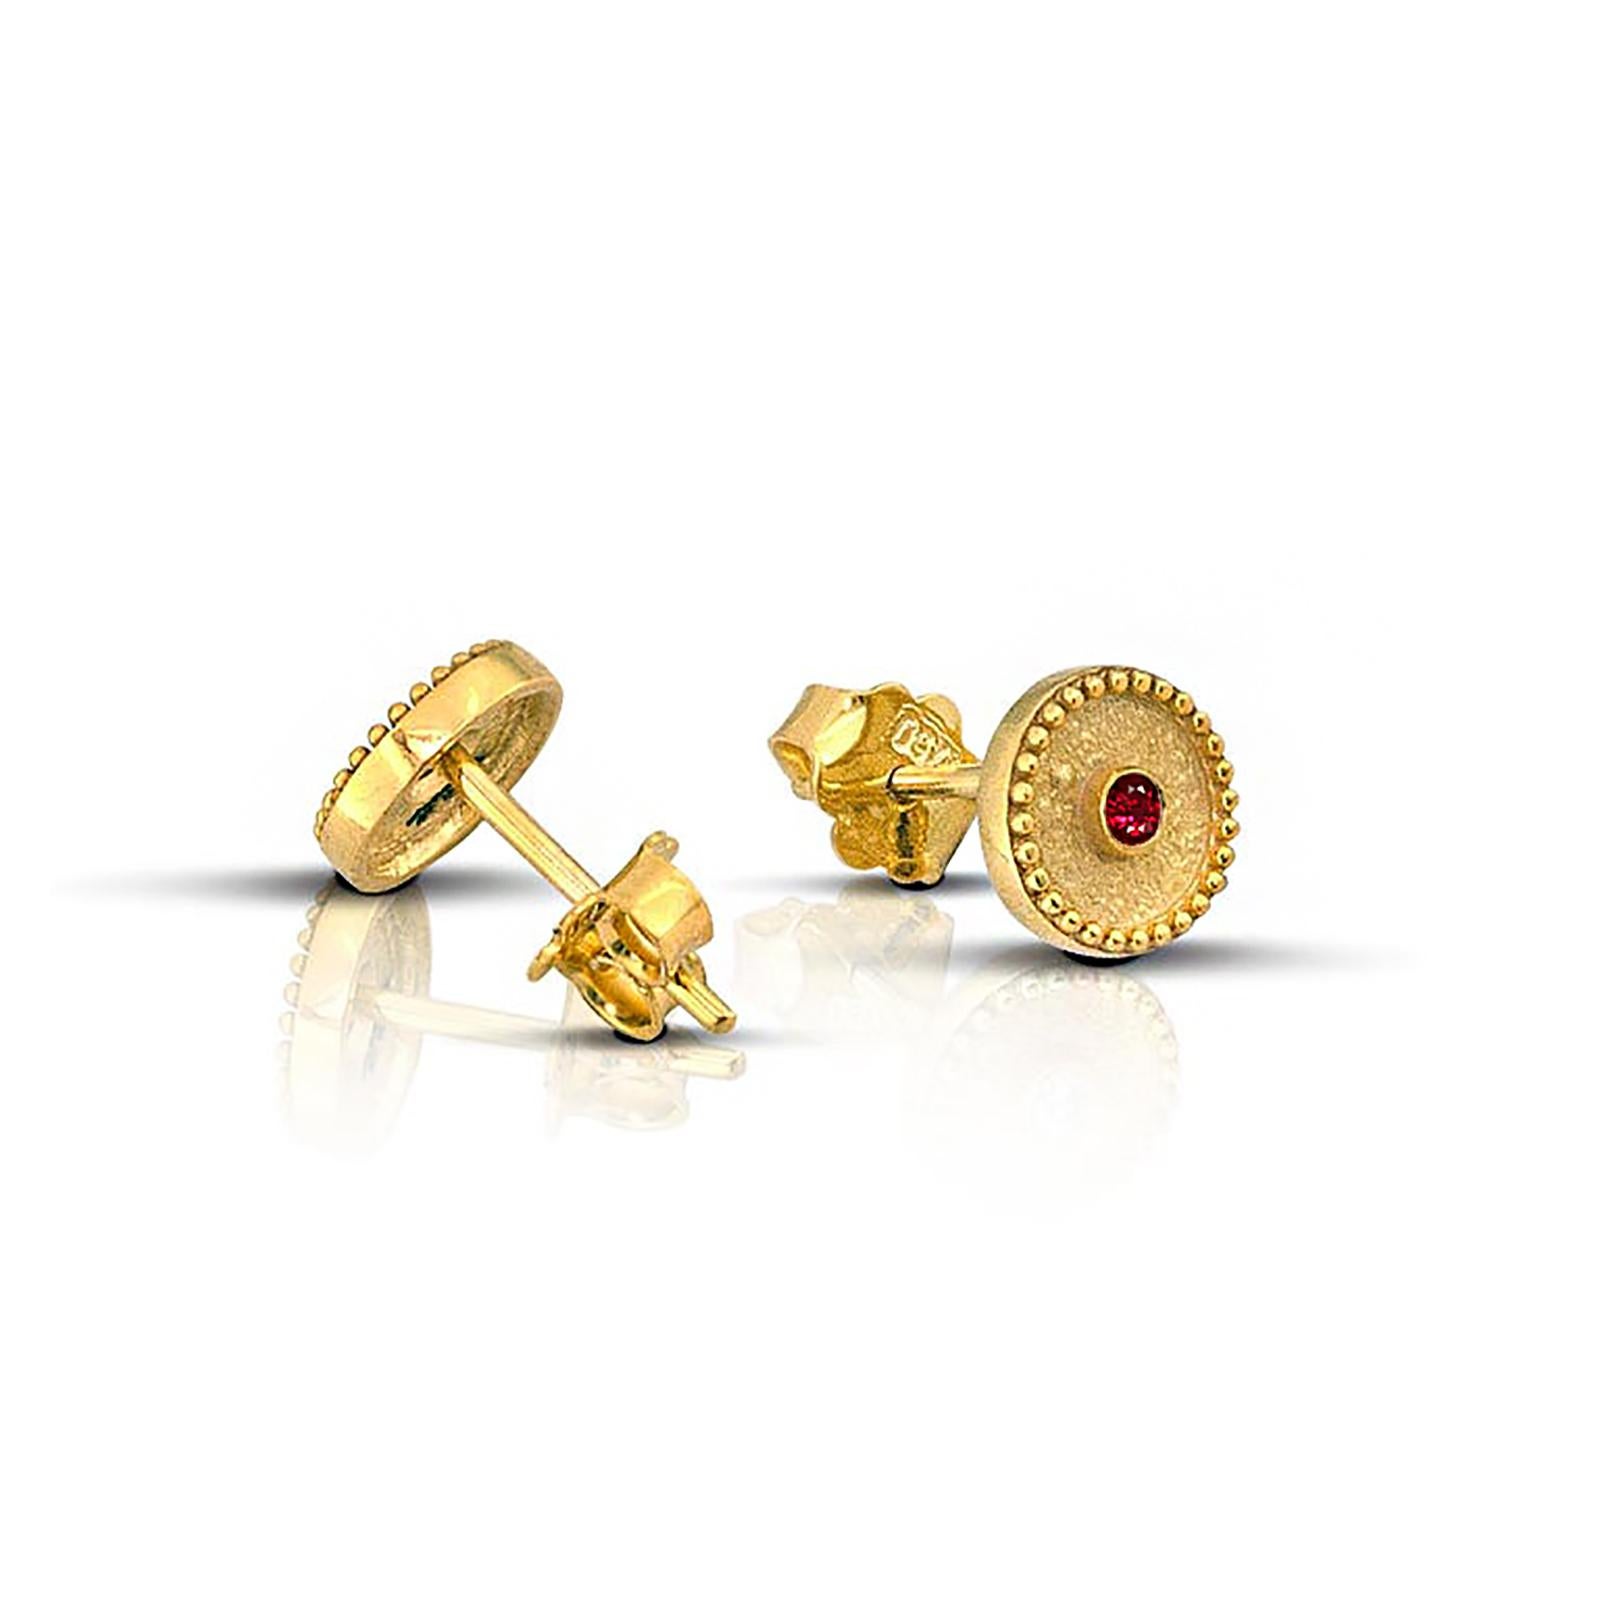 These S.Georgios stud Earrings are 18 Karat yellow gold and are all handmade. The stunning earrings are microscopically decorated with granulation workmanship and feature a unique velvet look on the background. They feature 2 Brilliant cut nature